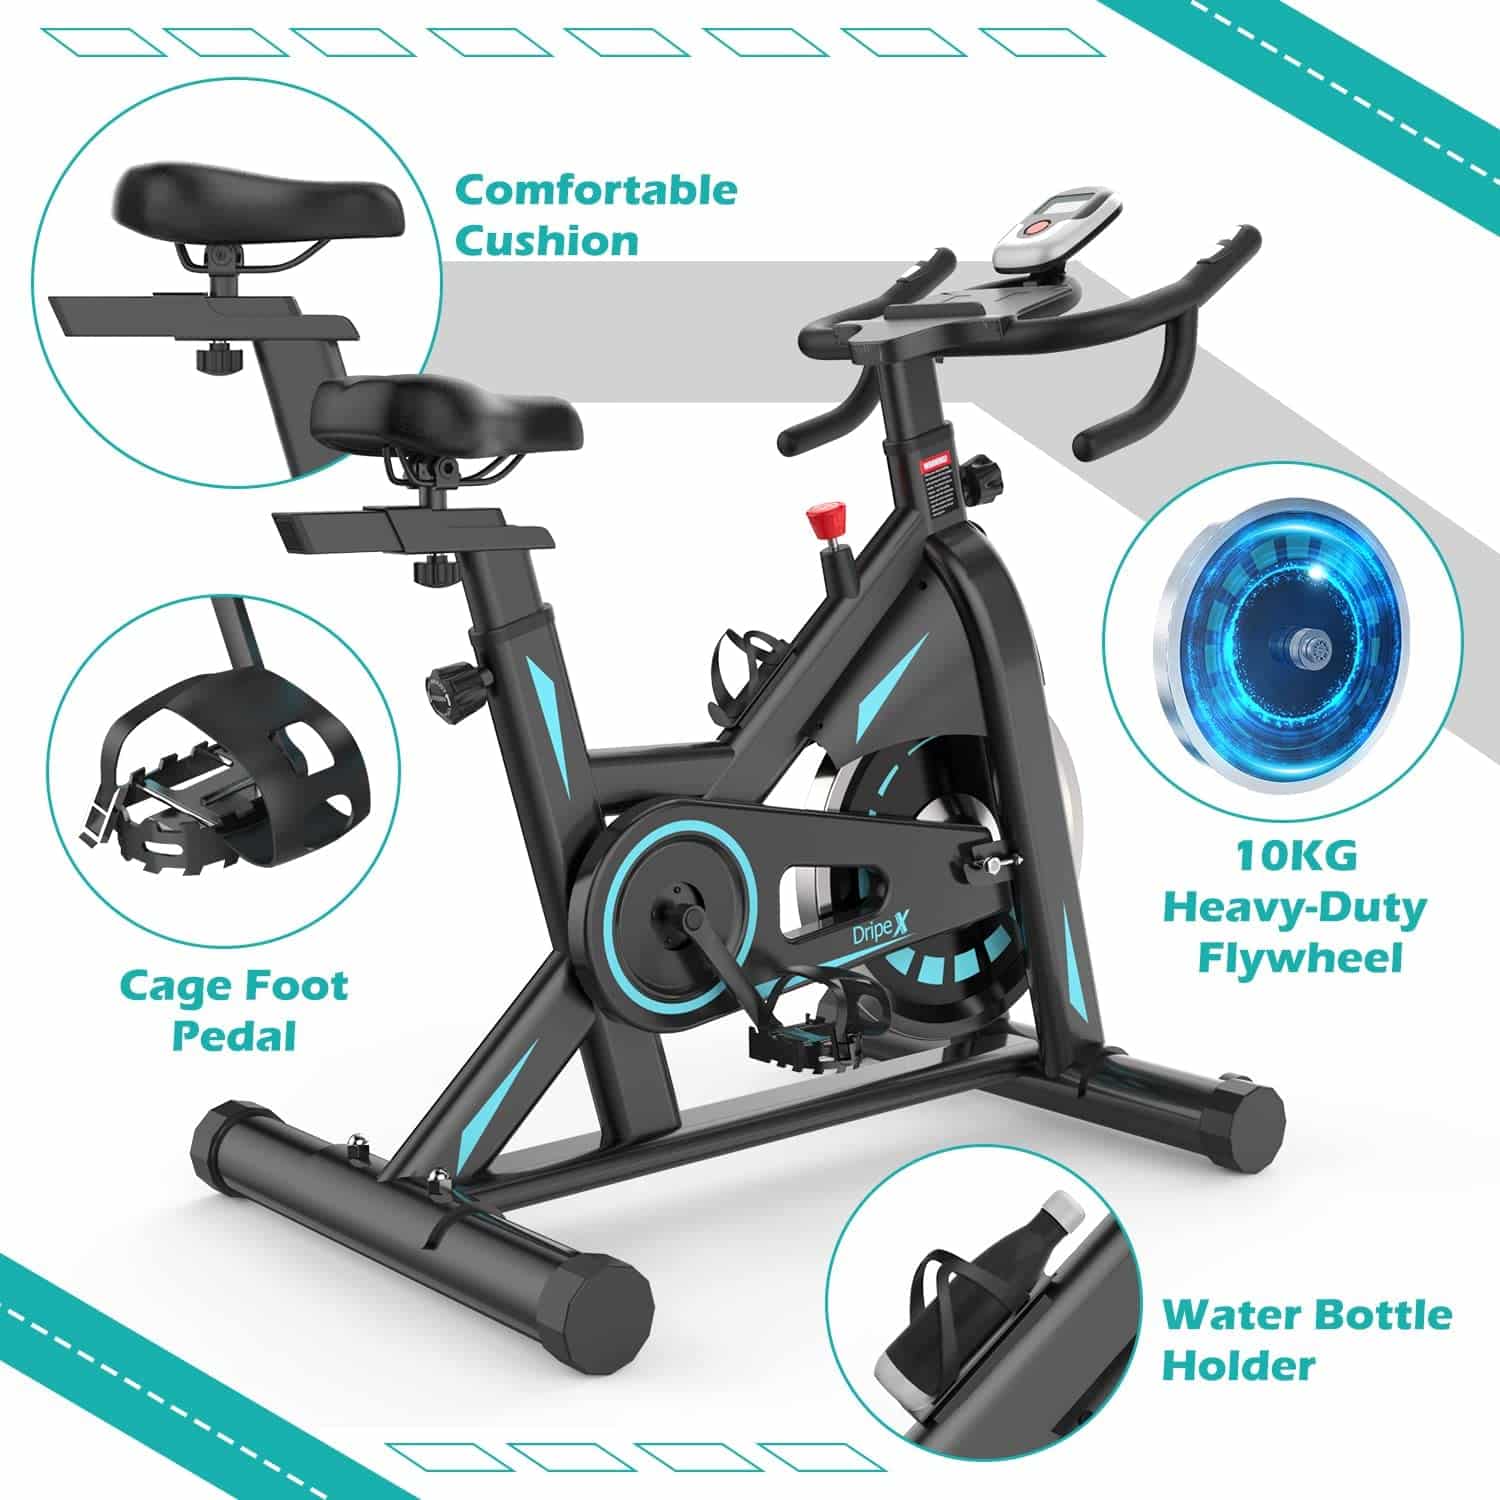 Dripex Magnetic Resistance Exercise Bike for Home Gym Training 2022 New Version Main Features 